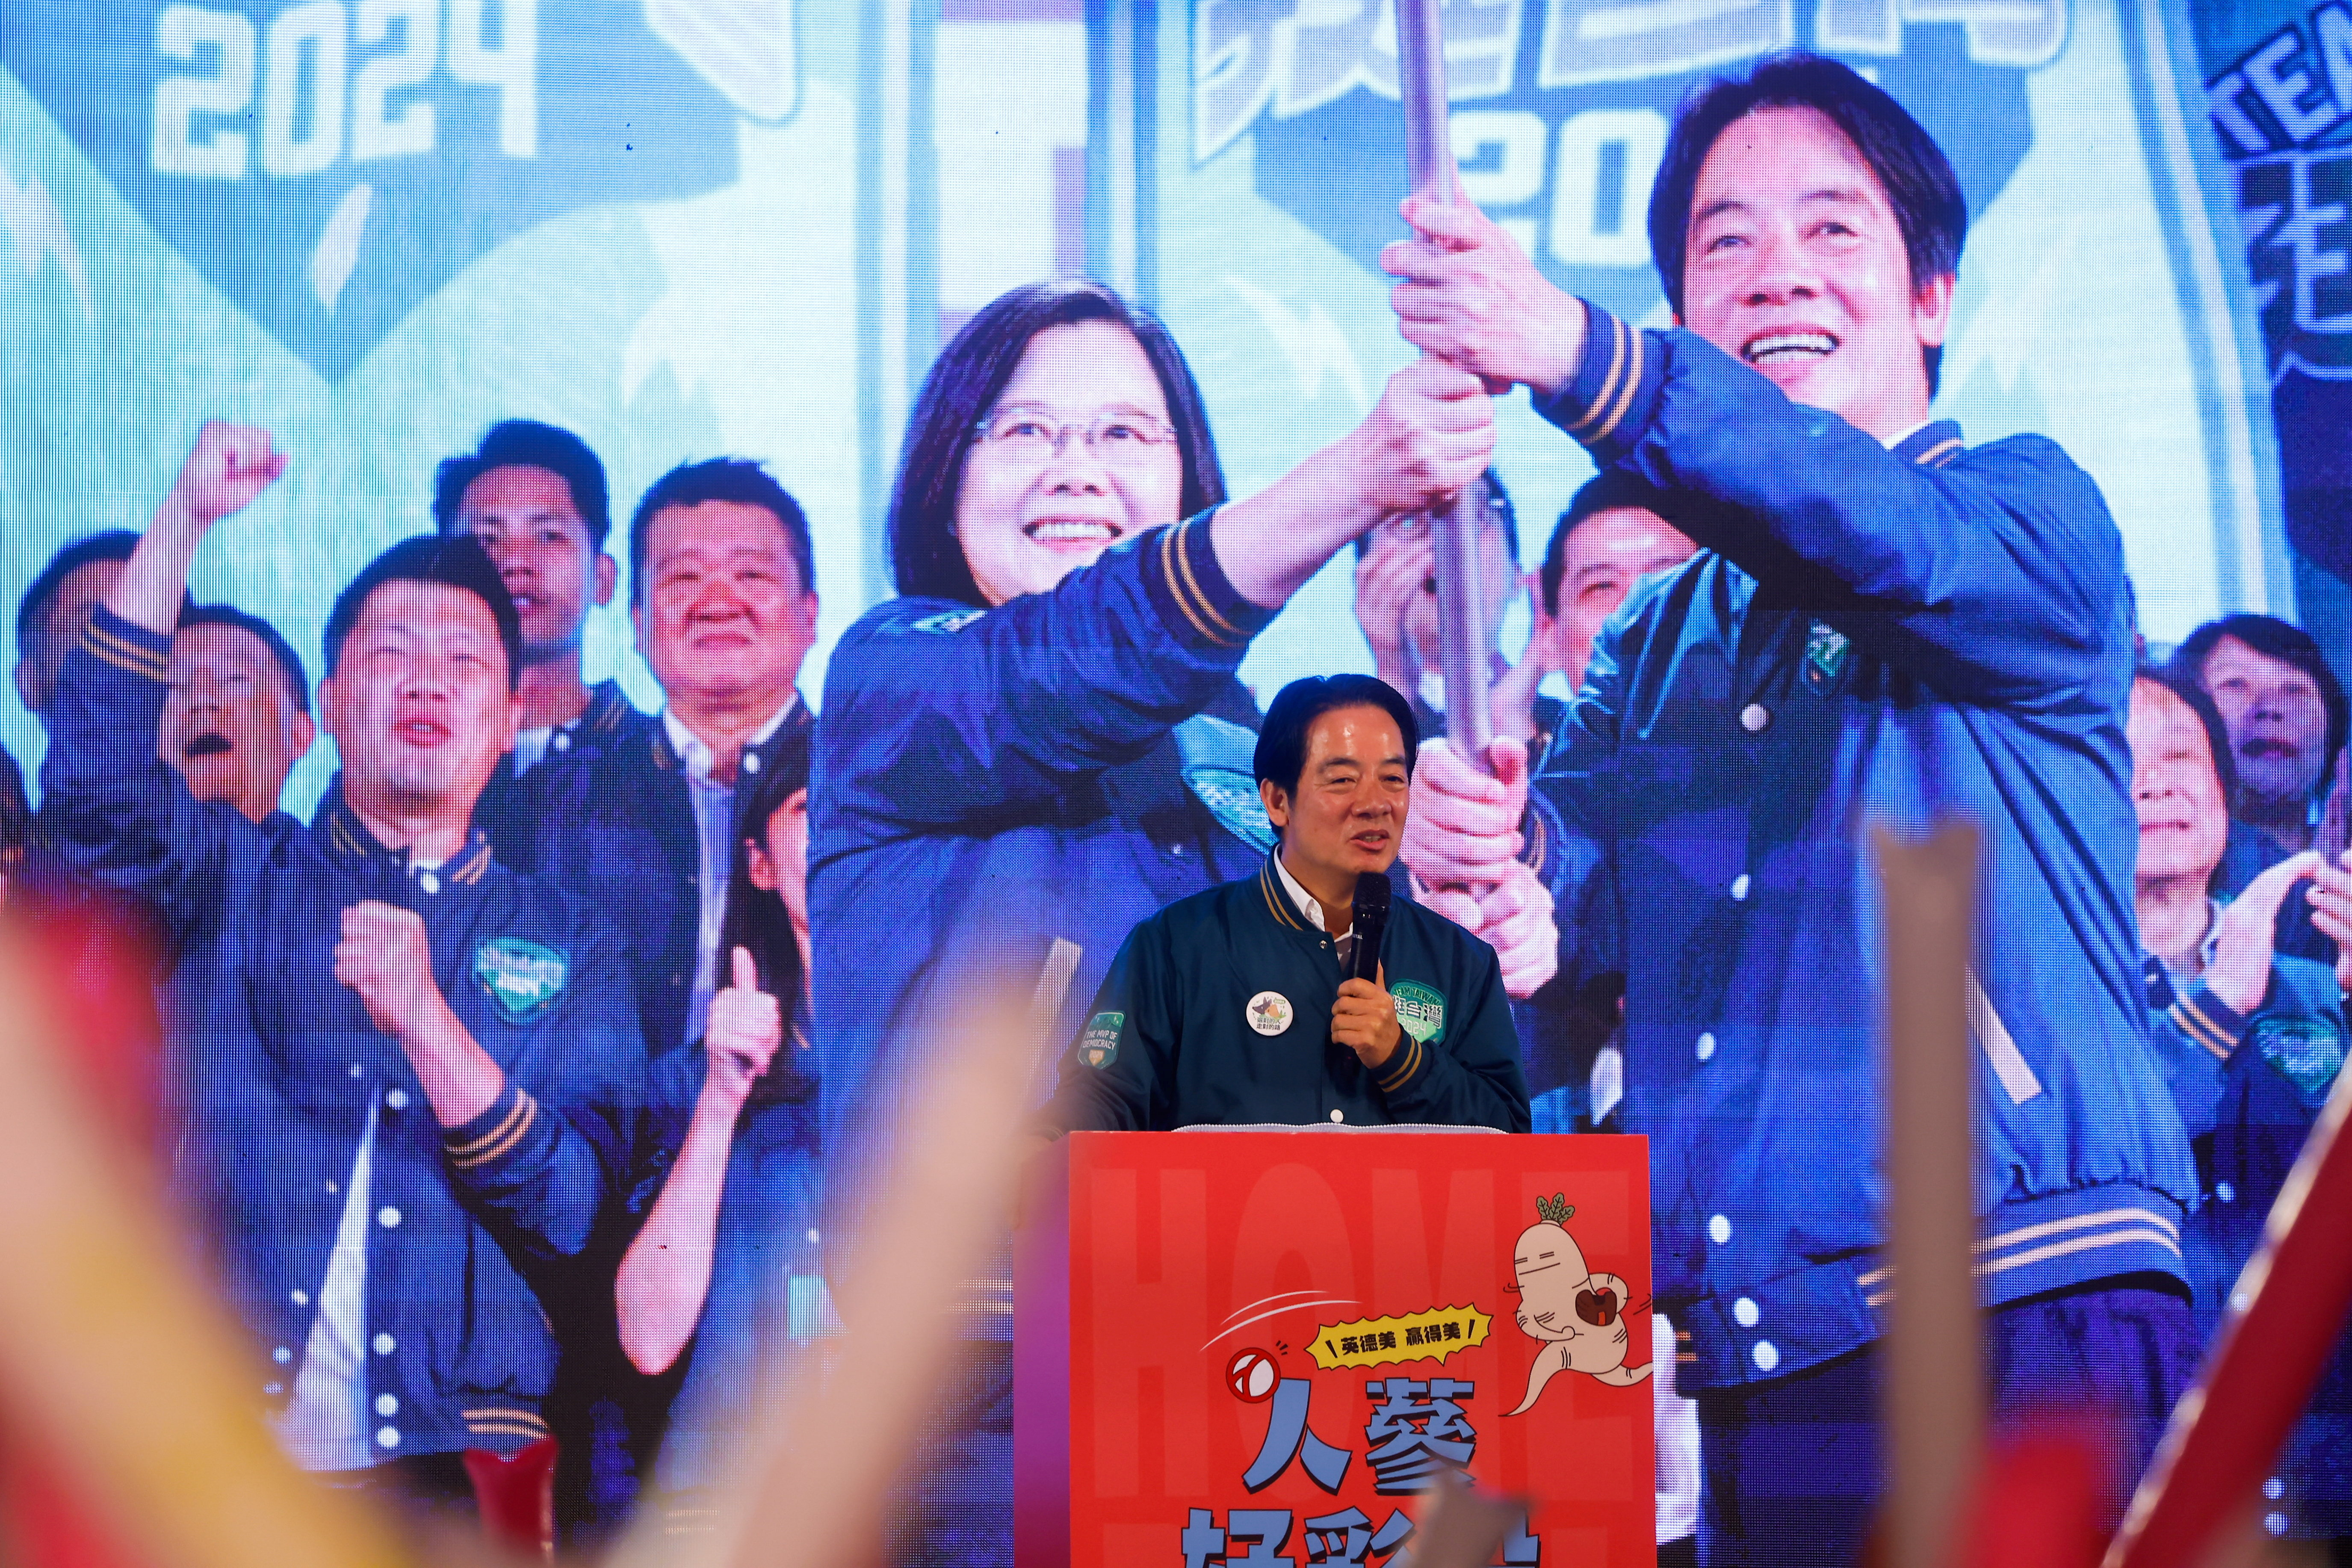 Taiwan's sovereignty belongs to its people, presidential frontrunner says |  Reuters